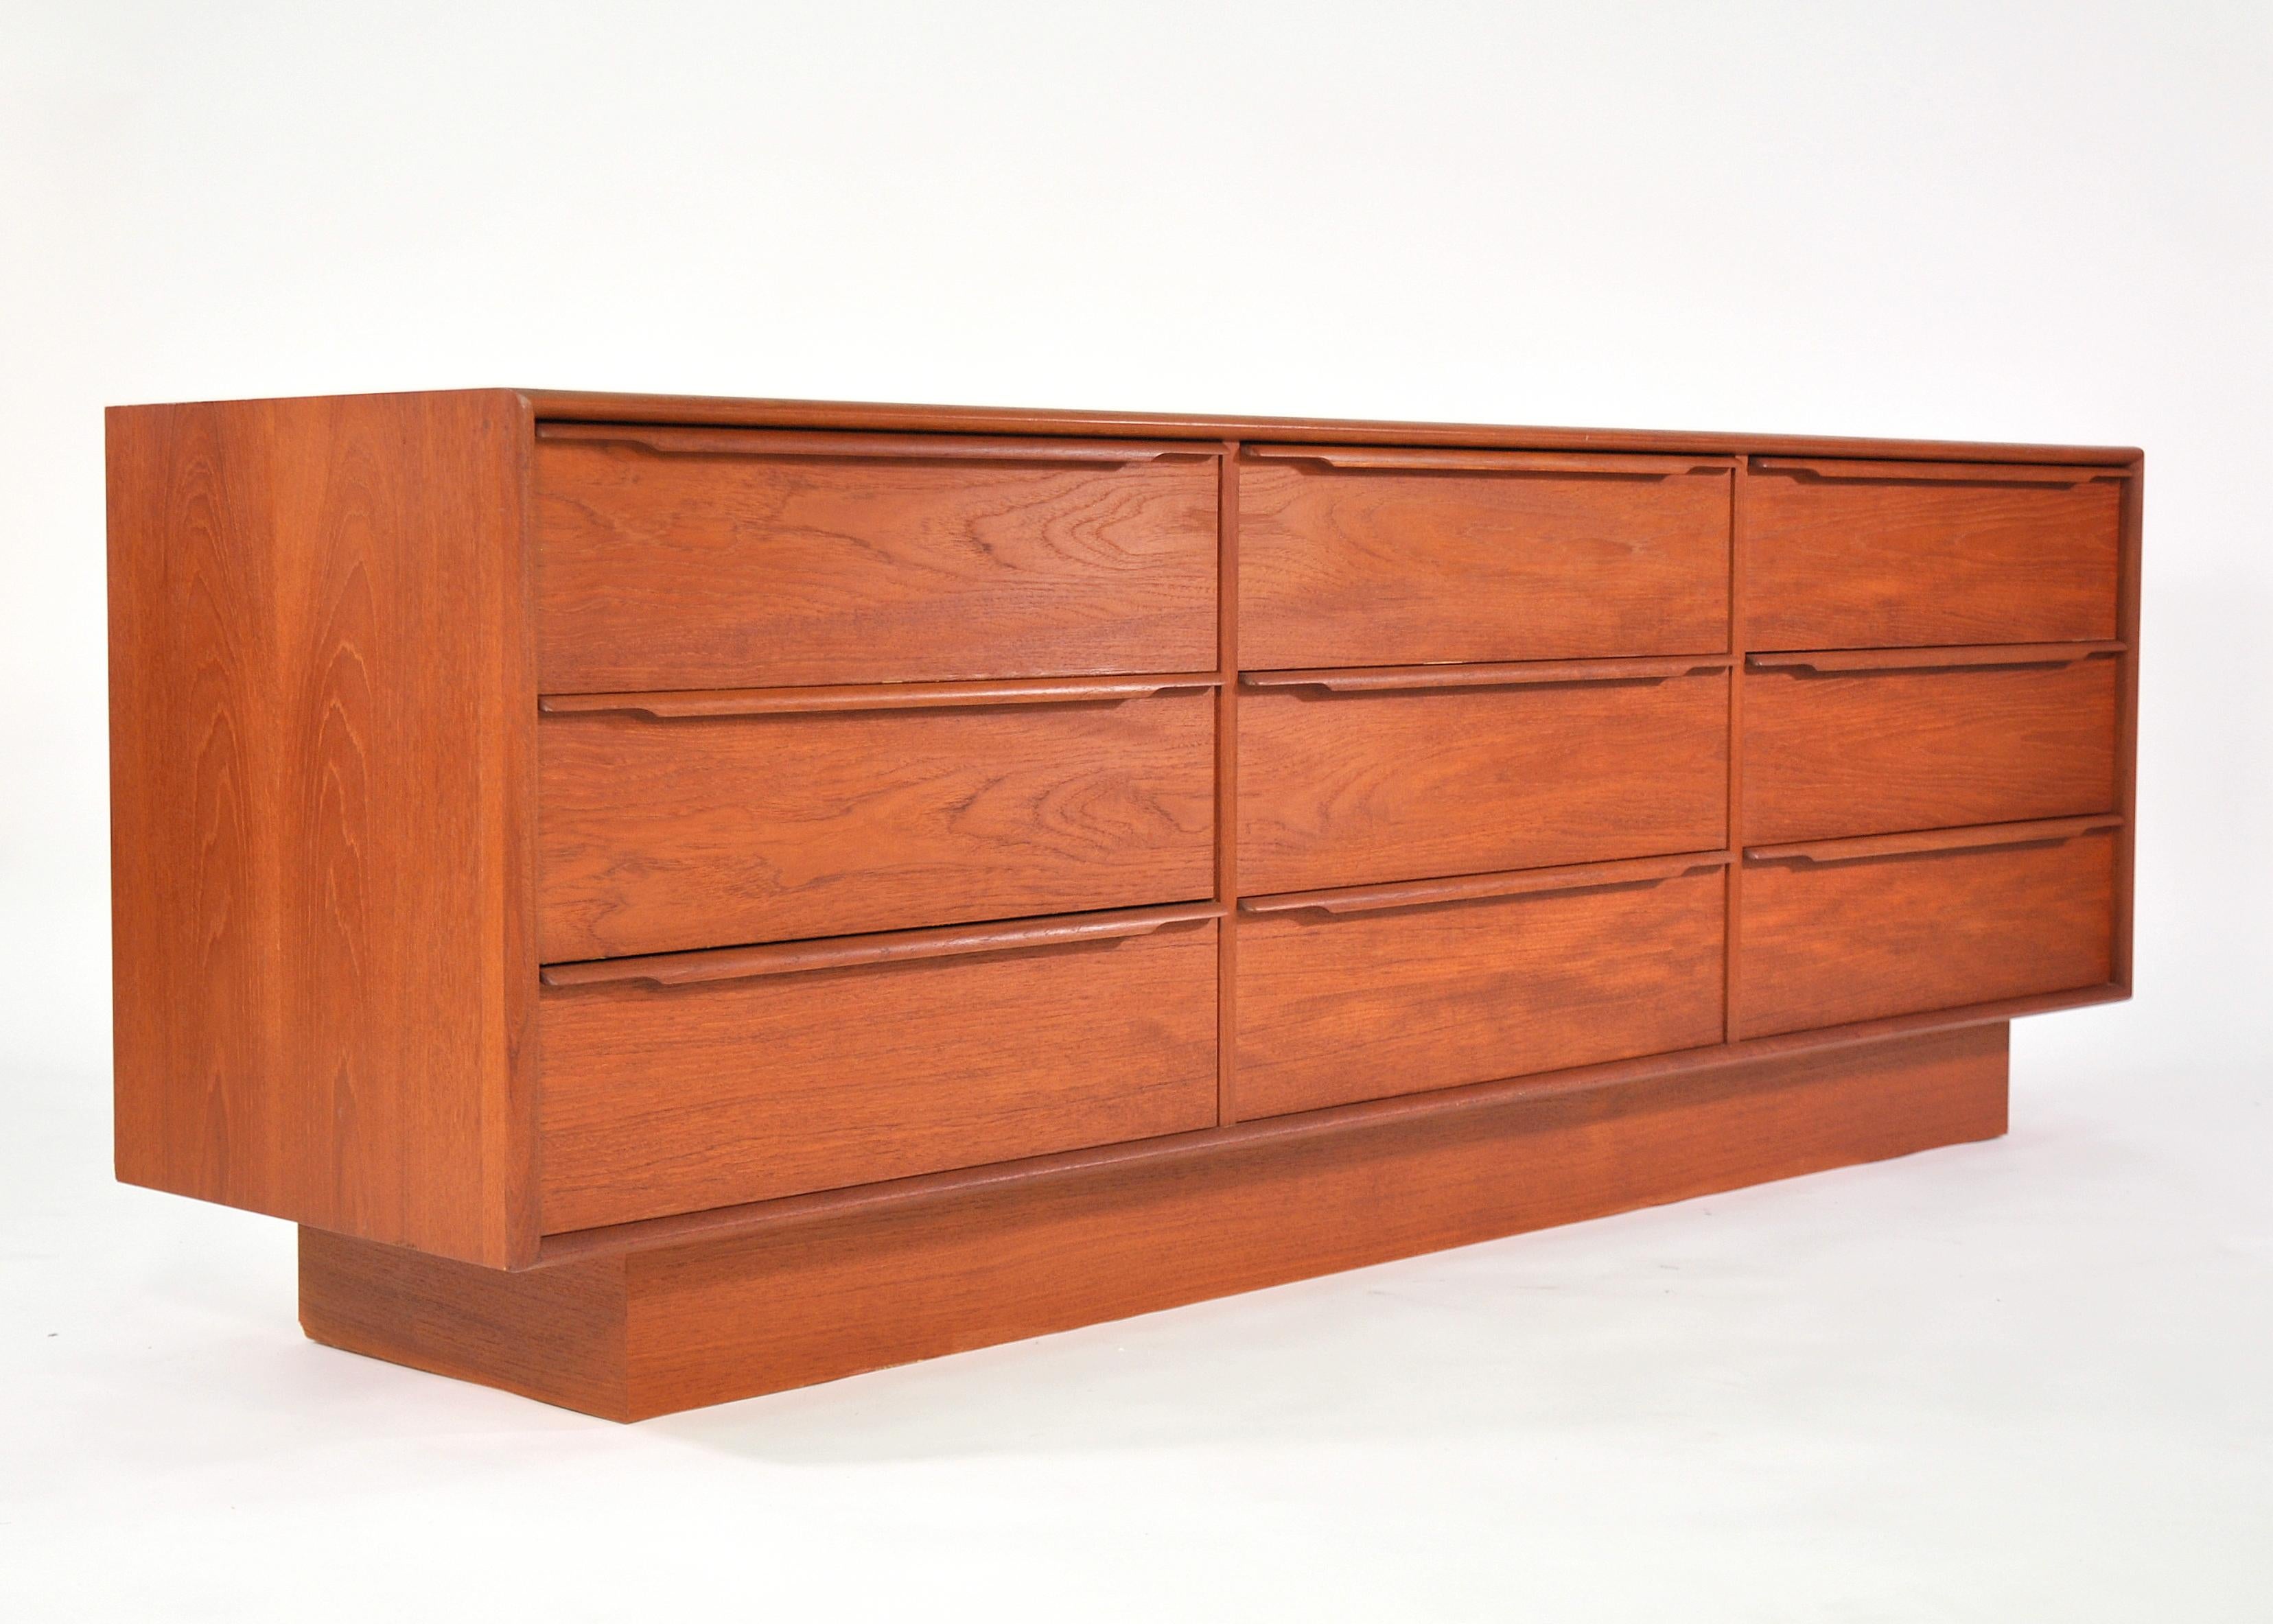 Both gorgeous and functional, this Scandinavian Modern credenza dates from the 1970s. With a total of 9 drawers, it provides a ton of storage space. The vintage dresser features beautifully sculpted teak handles and a plinth base. The grain and